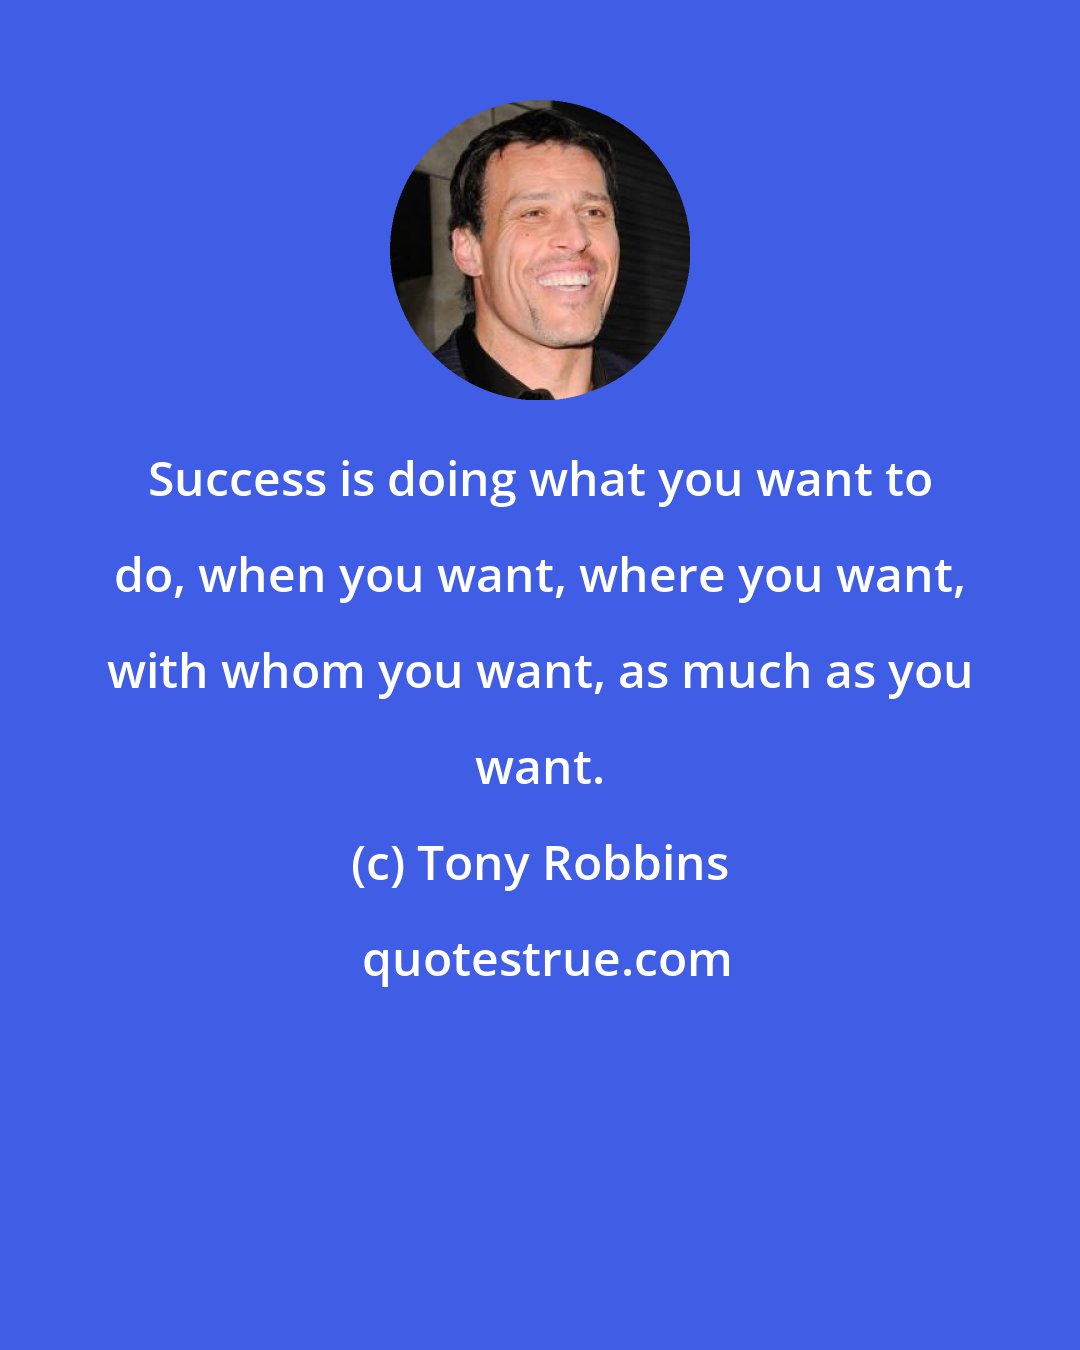 Tony Robbins: Success is doing what you want to do, when you want, where you want, with whom you want, as much as you want.